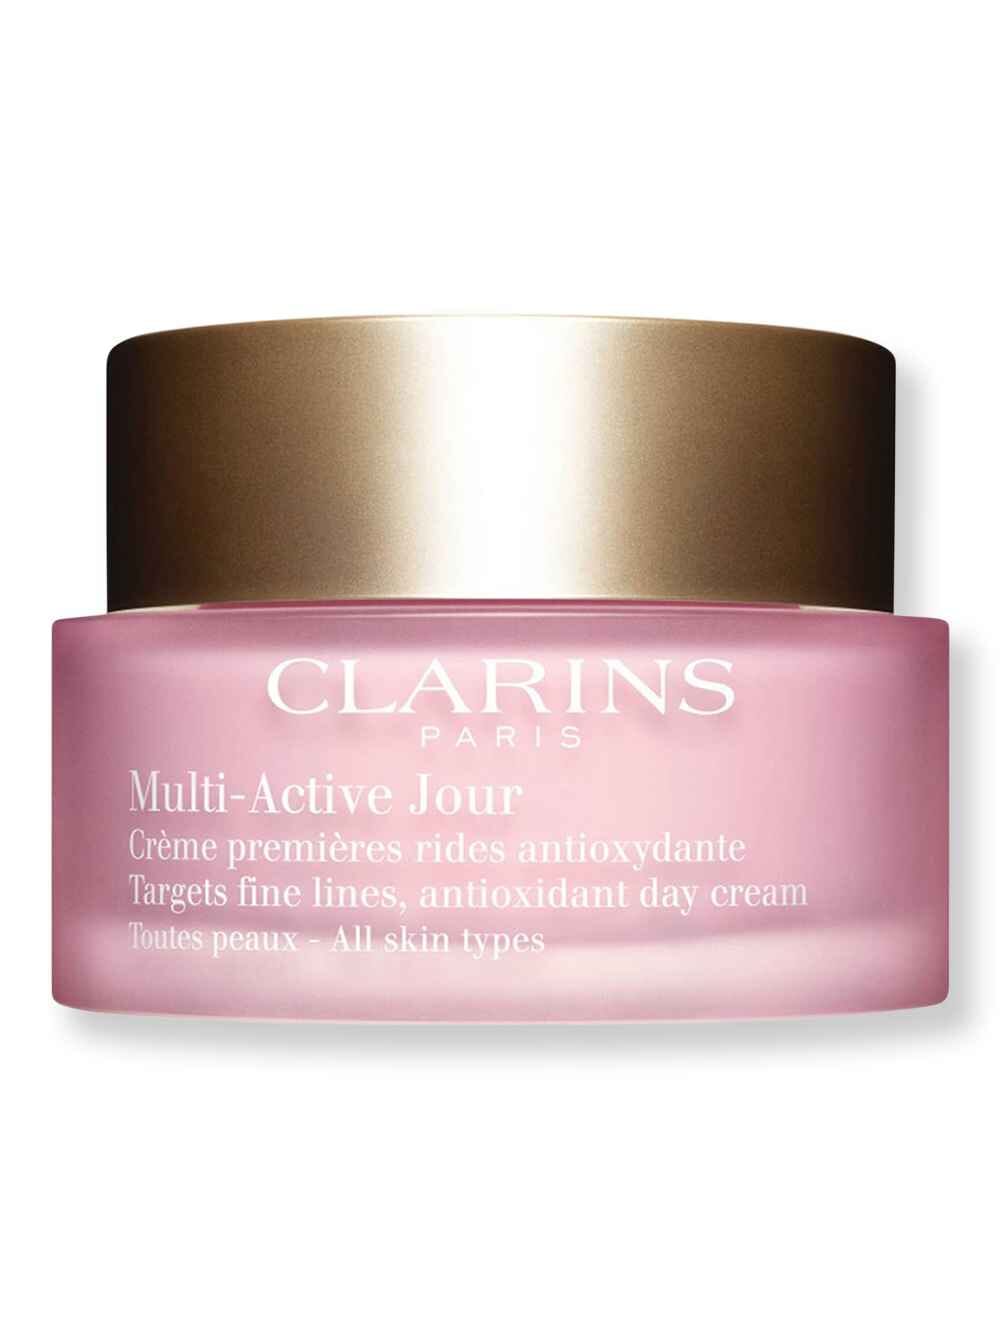 Clarins Clarins Multi-Active Day Cream All Skin Types 1.6 oz50 ml Face Moisturizers 